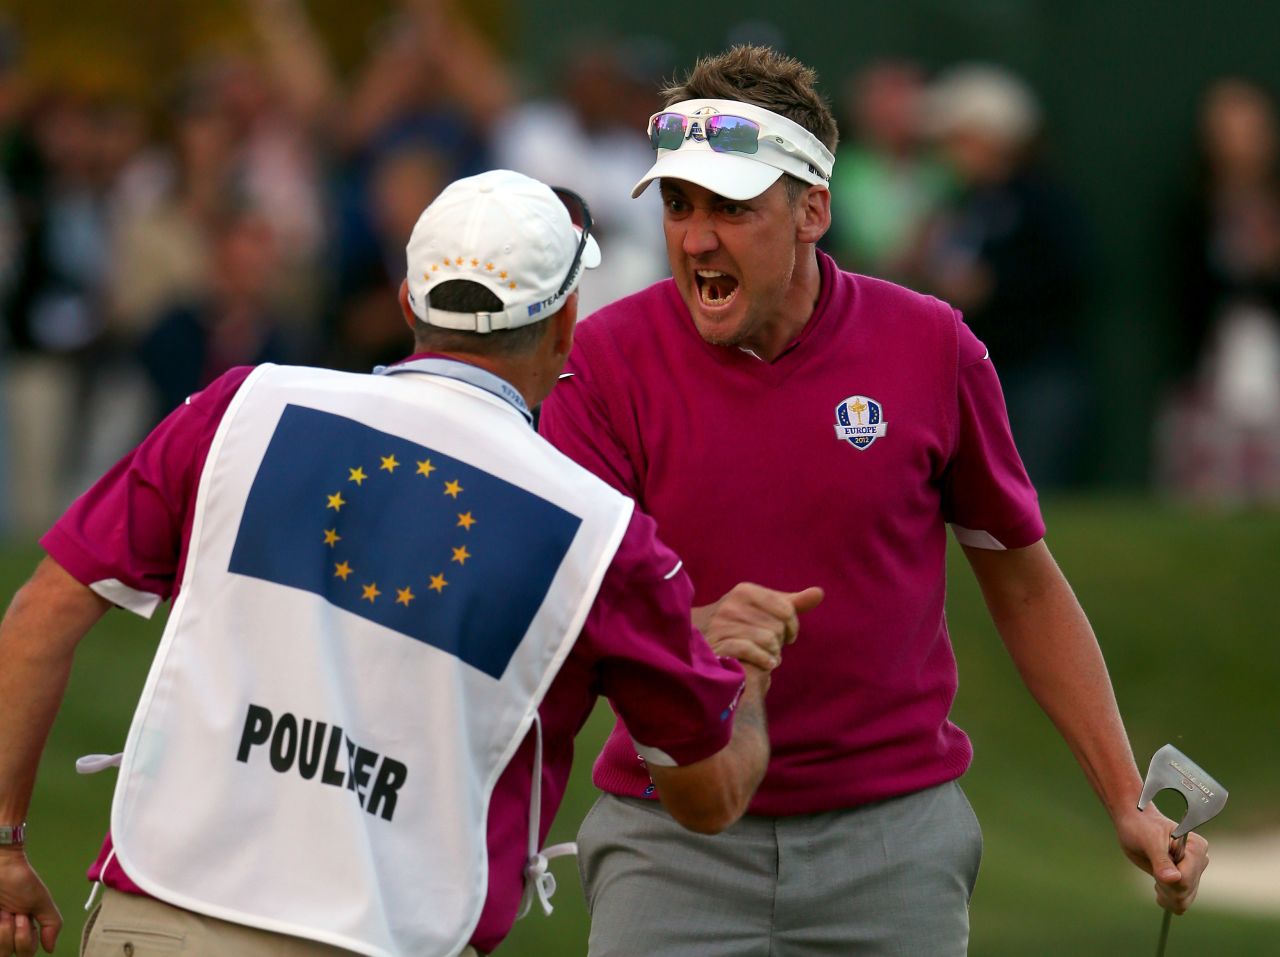 Europe's talisman will make his sixth Ryder Cup appearance and first as a player since 2014 after acting as a vice-captain two years ago. The Englishman has an impressive Ryder Cup record and was the driving force behind Europe's remarkable comeback in the "Miracle at Medinah" in 2012.    